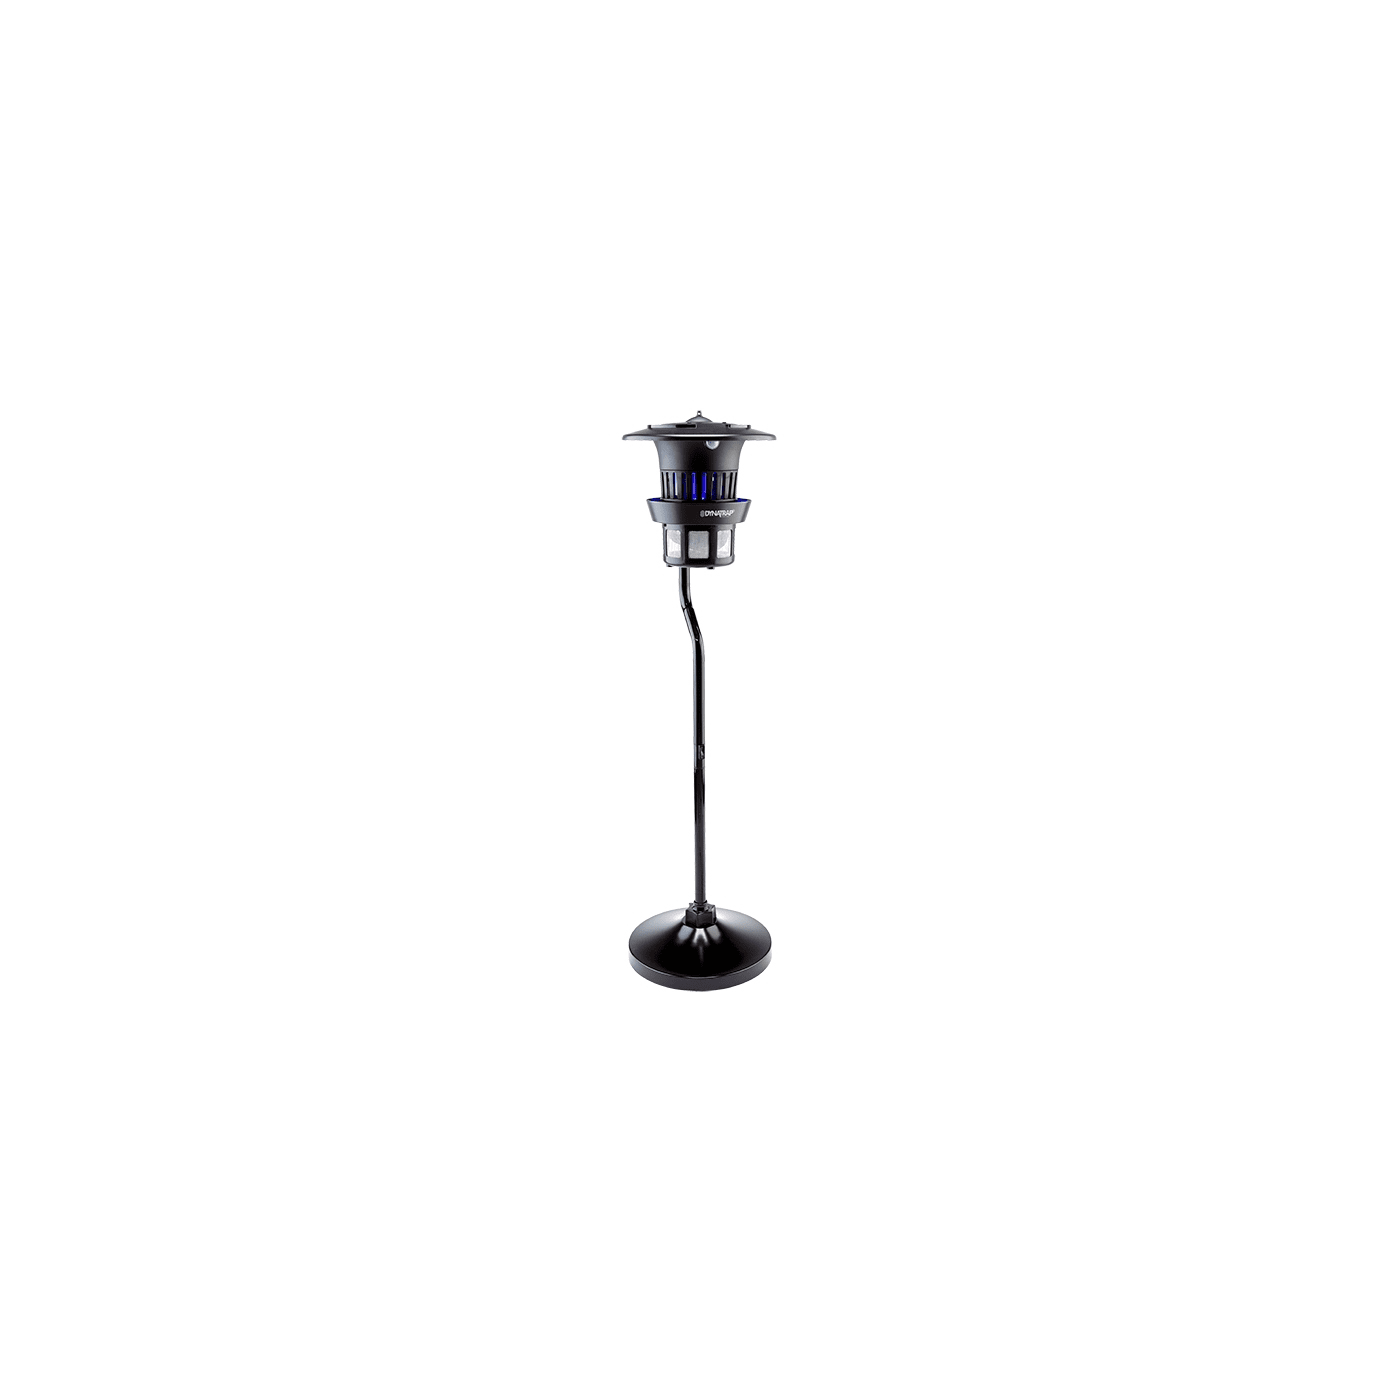 Dynatrap Outdoor Insect Trap with Stand